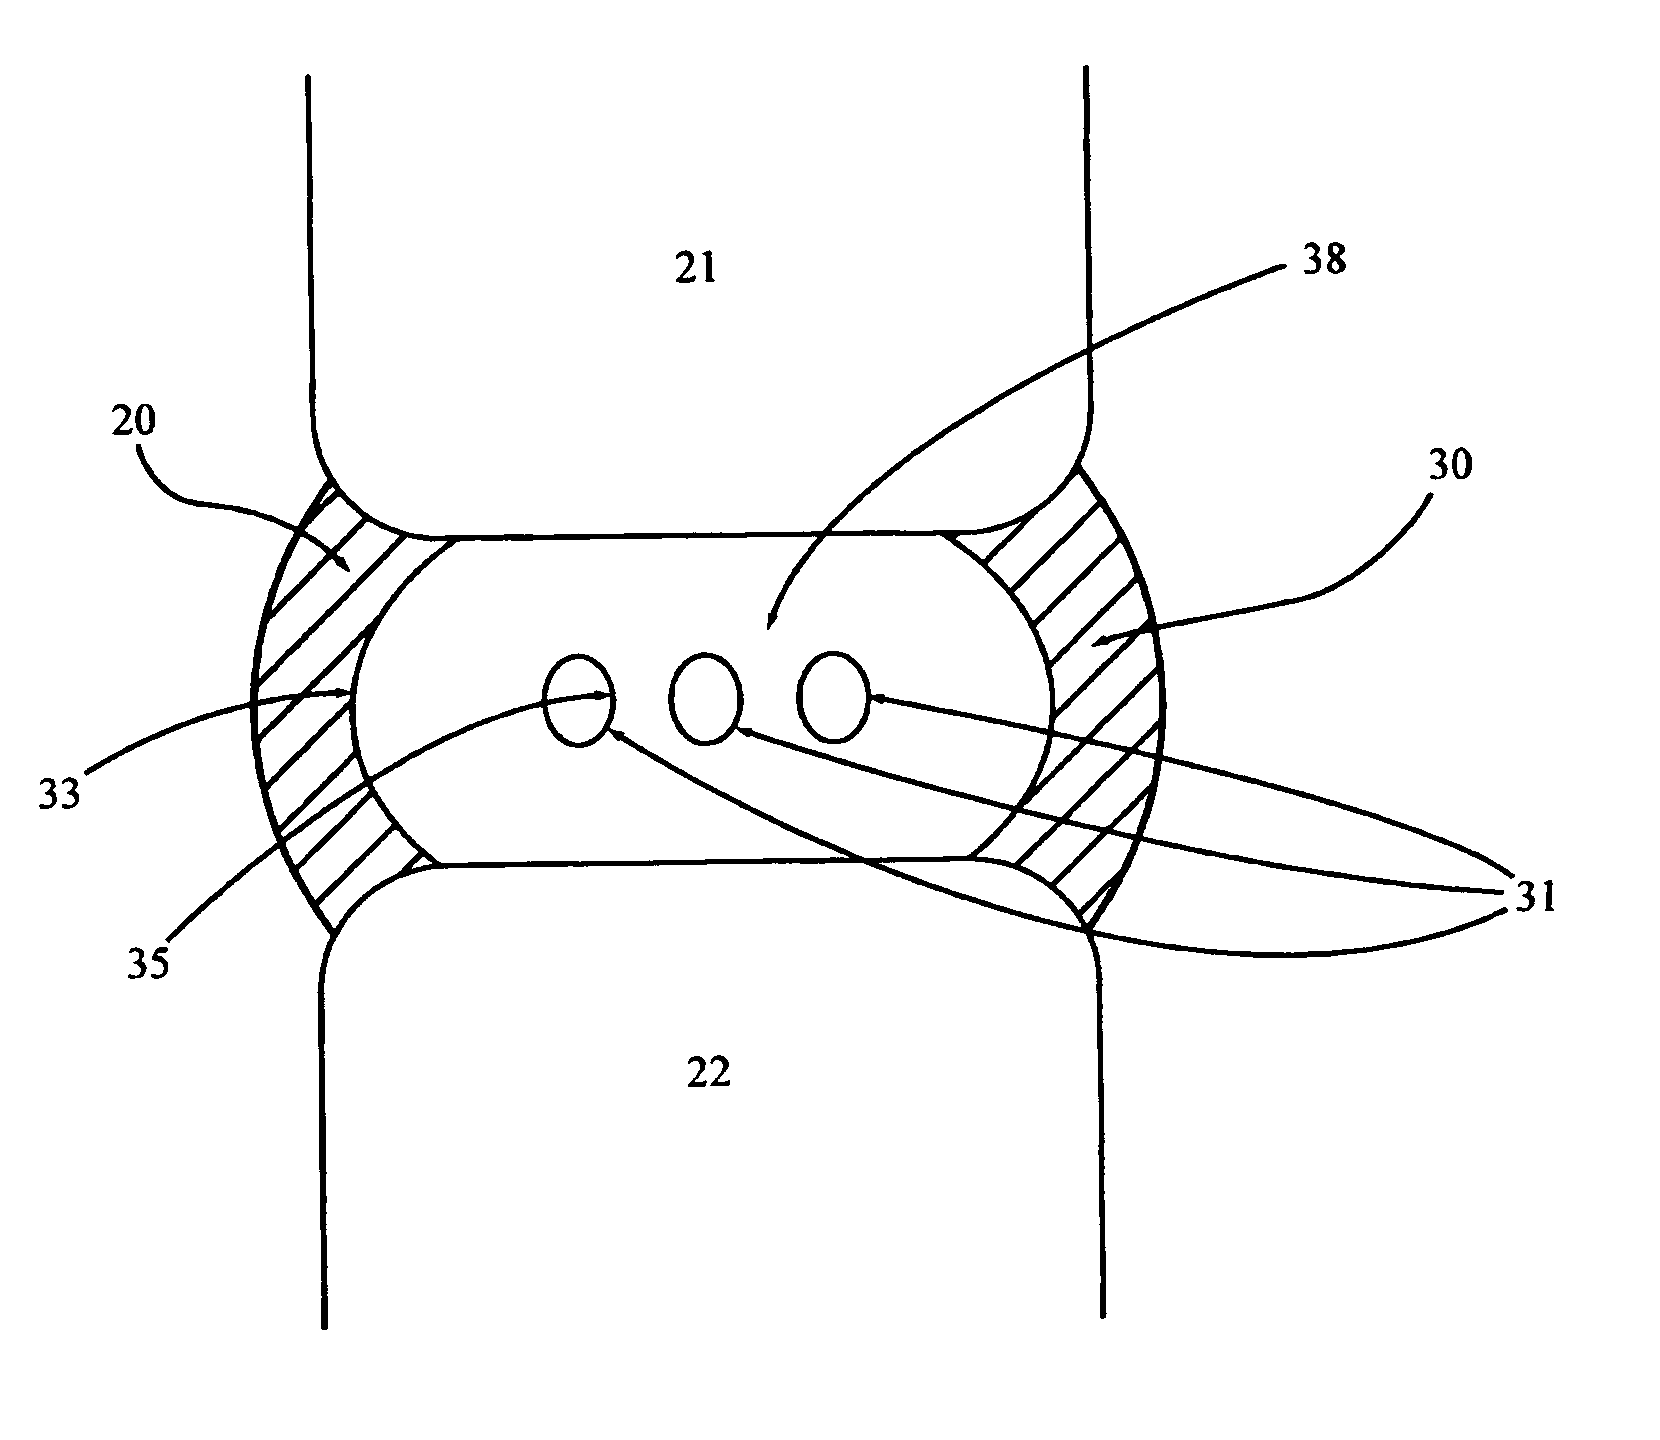 Spinal disc implants with reservoirs for delivery of therapeutic agents